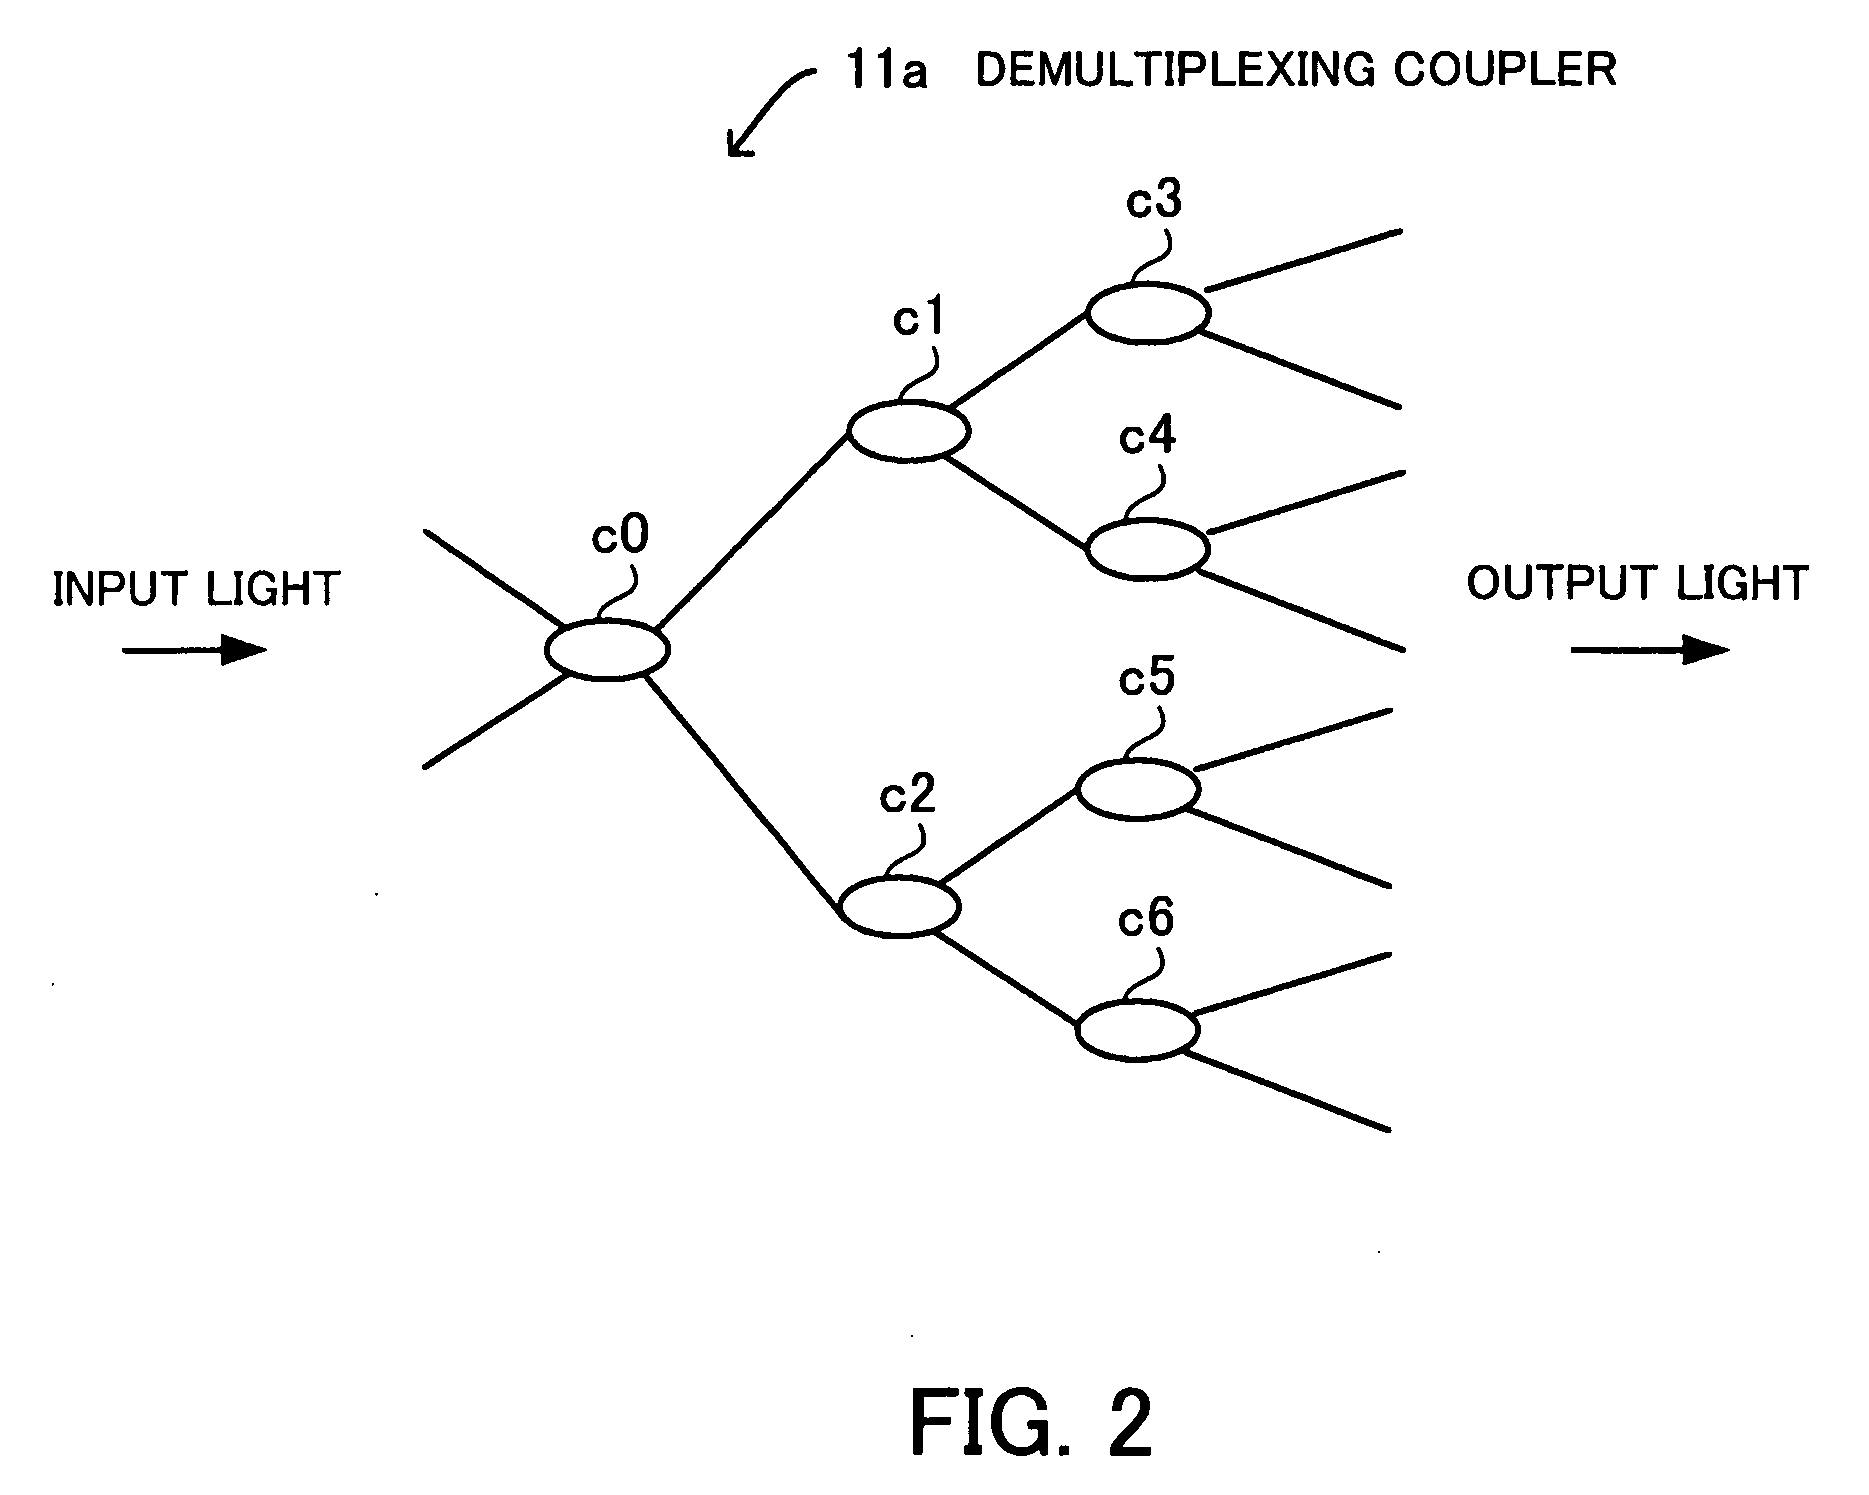 Optical switching device